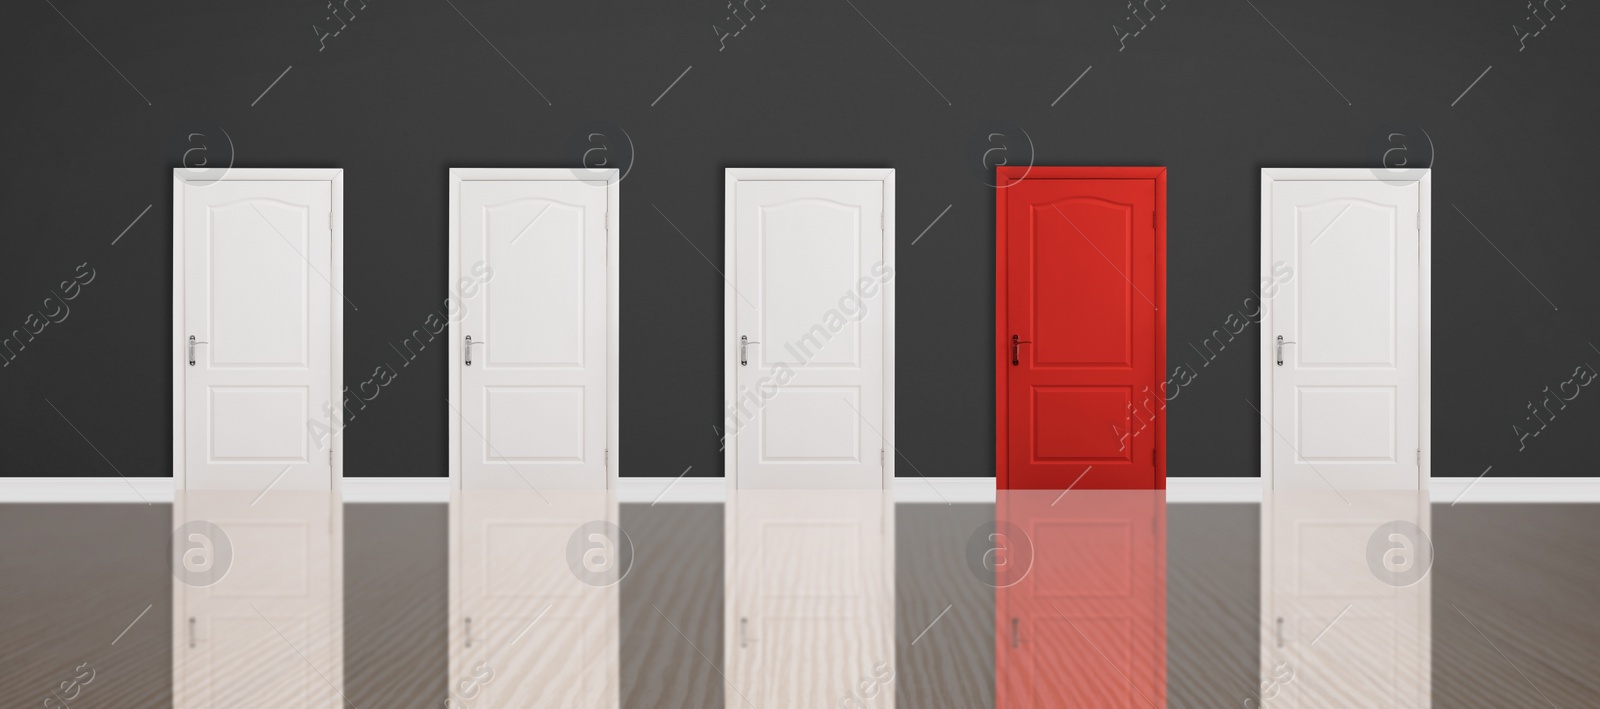 Image of Red door among white ones in room. Concept of choice